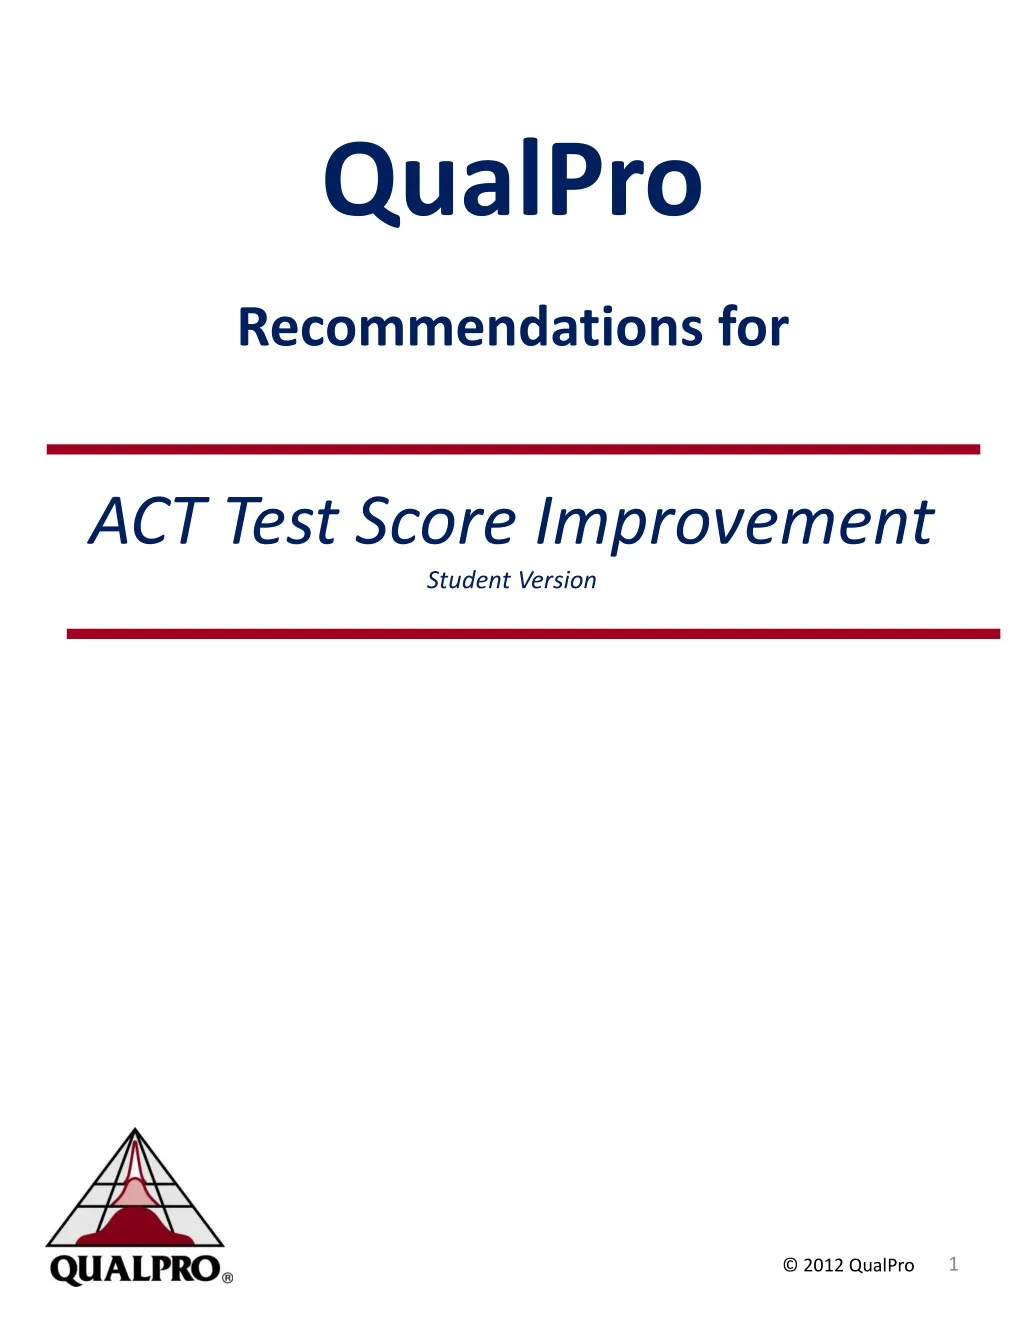 qualpro recommendations for